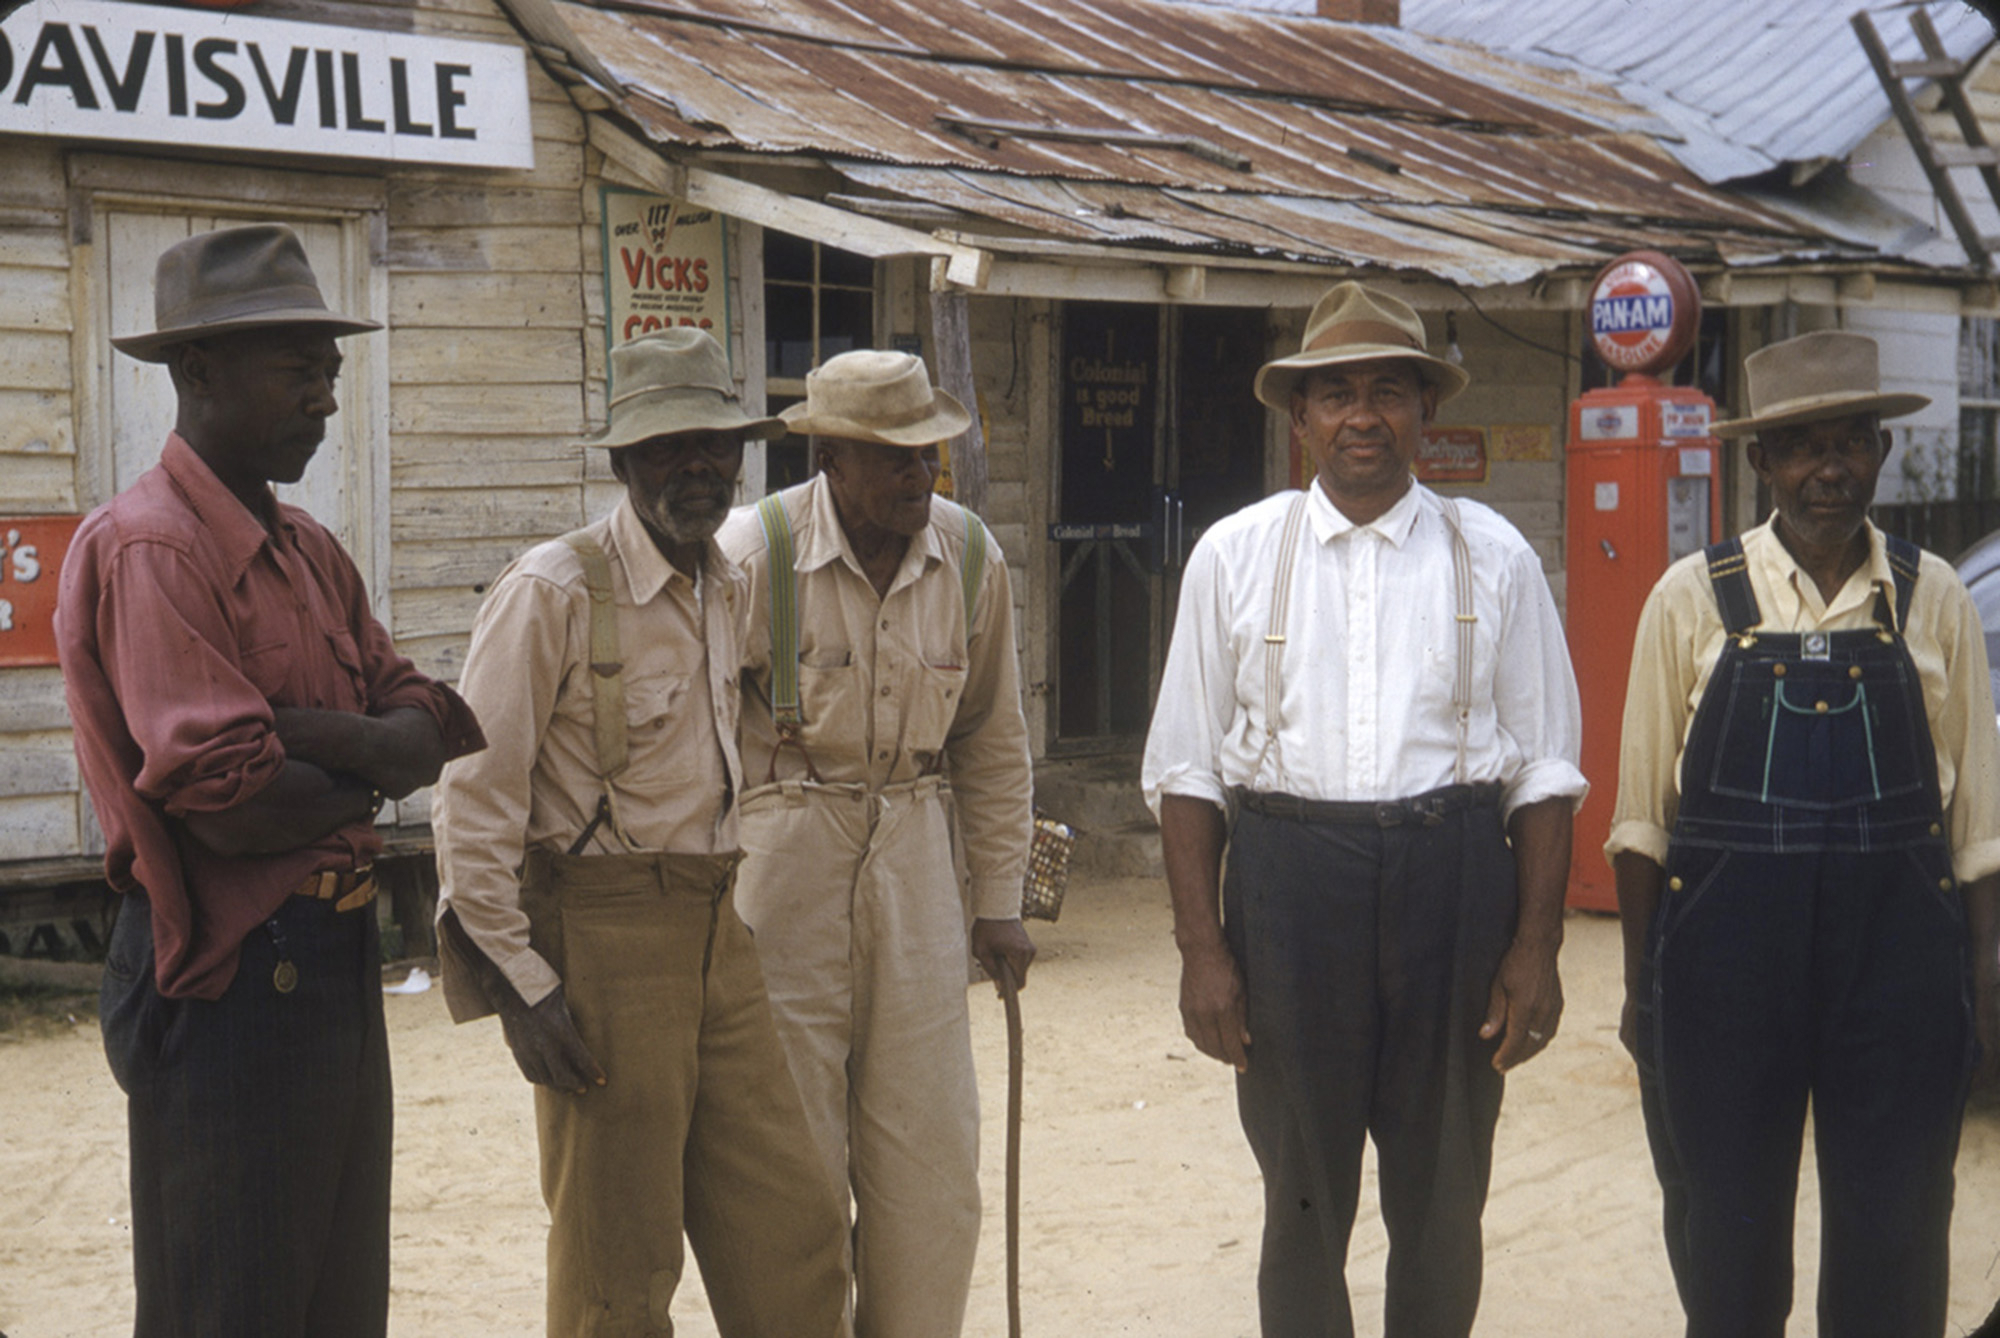 Group of five men in vintage workwear standing in front of a rustic wooden building